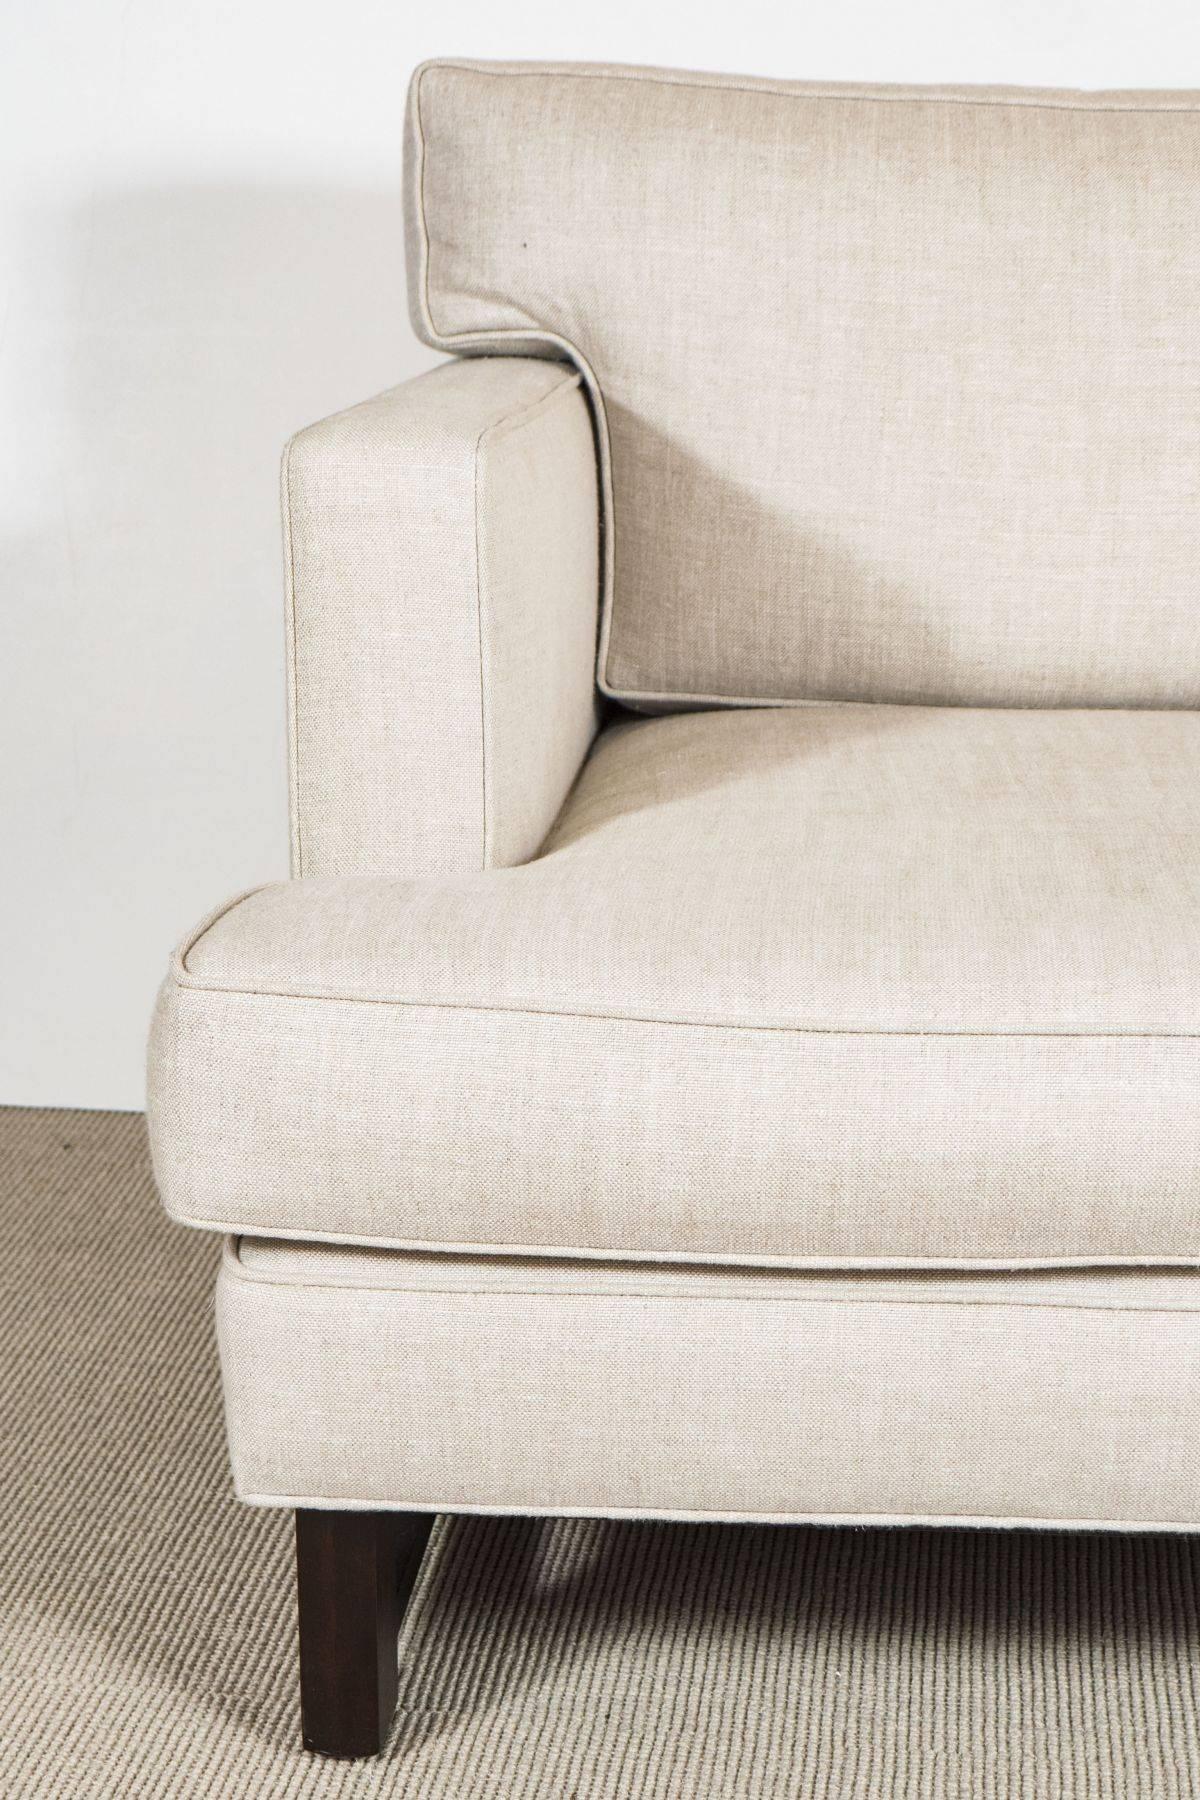 1960s inspired club chair in the manner of Edward Wormley upholstered in light beige Belgian linen, contemporary.